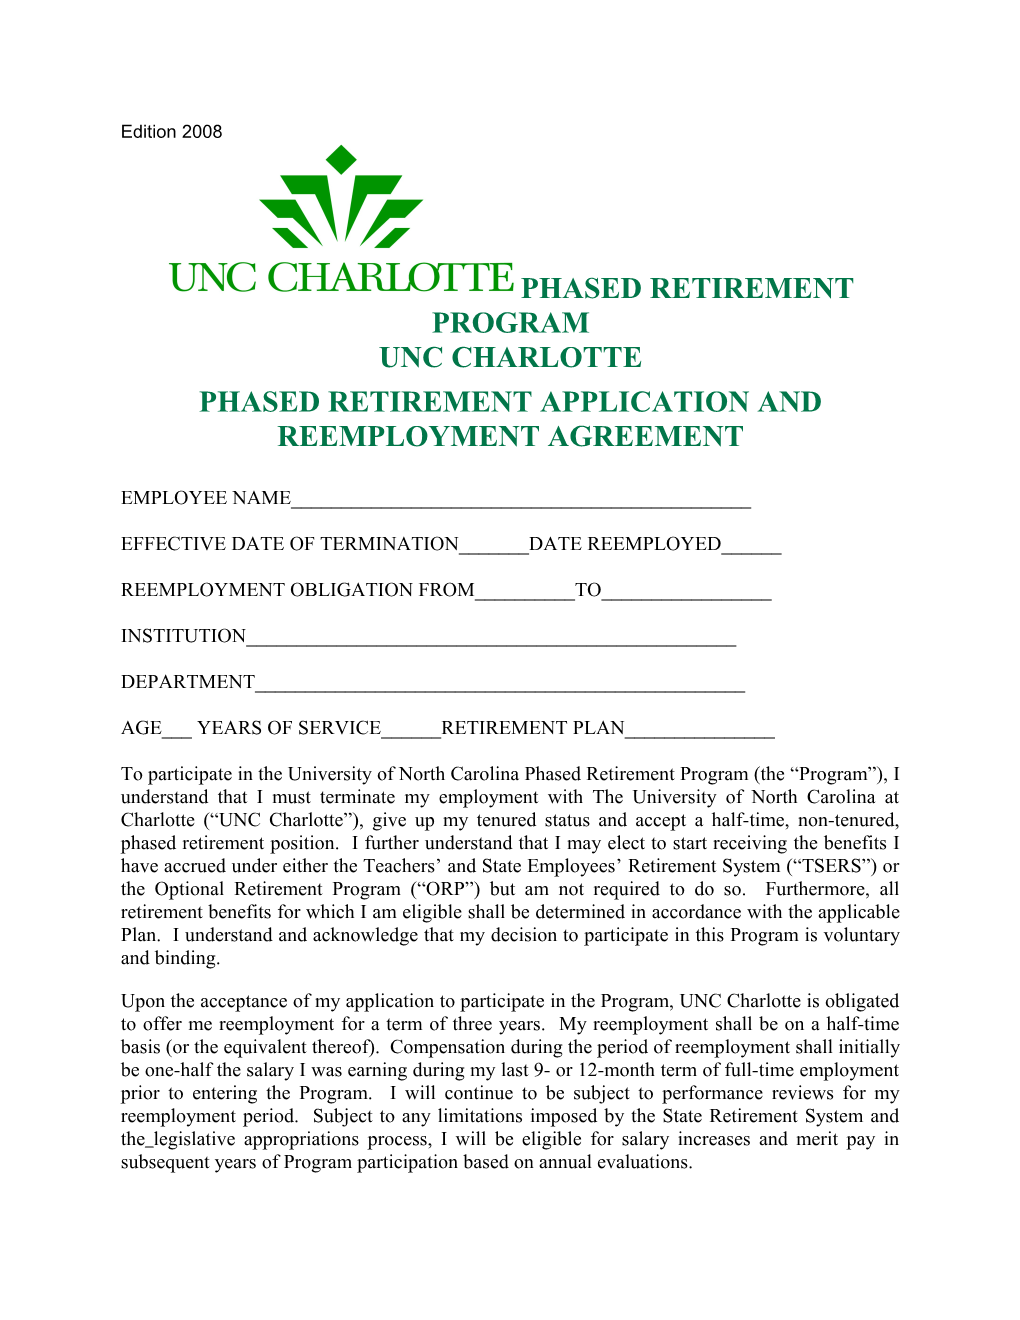 Phased Retirement Application and Reemployment Agreement